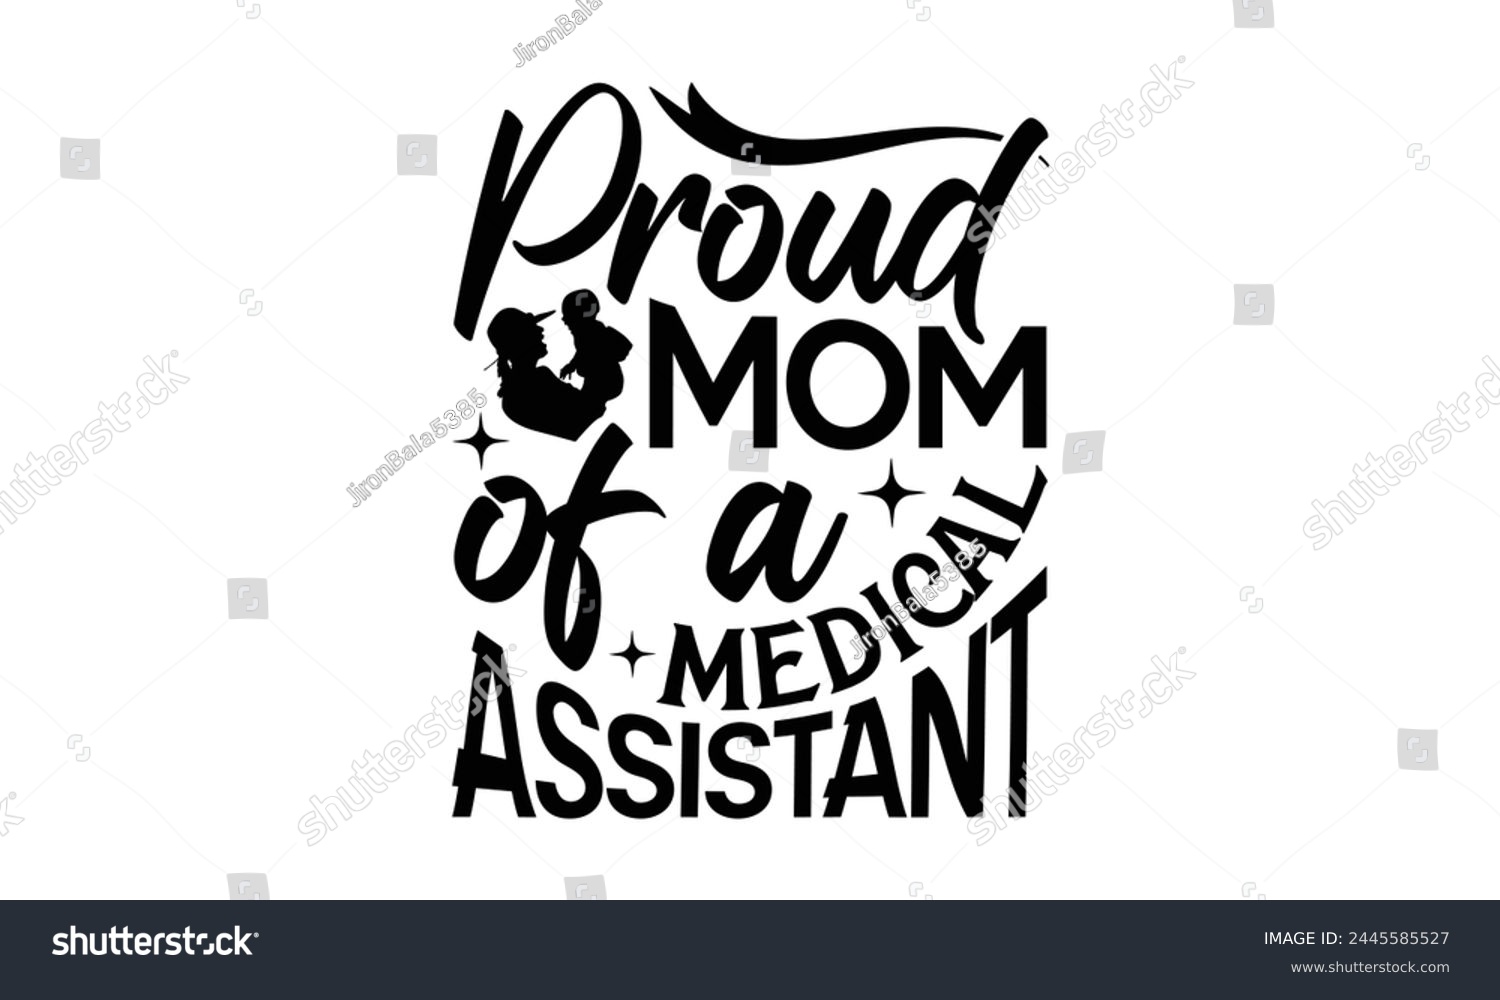 SVG of Proud mom of a medical assistant - Mom t-shirt design, isolated on white background, this illustration can be used as a print on t-shirts and bags, cover book, template, stationary or as a poster. svg